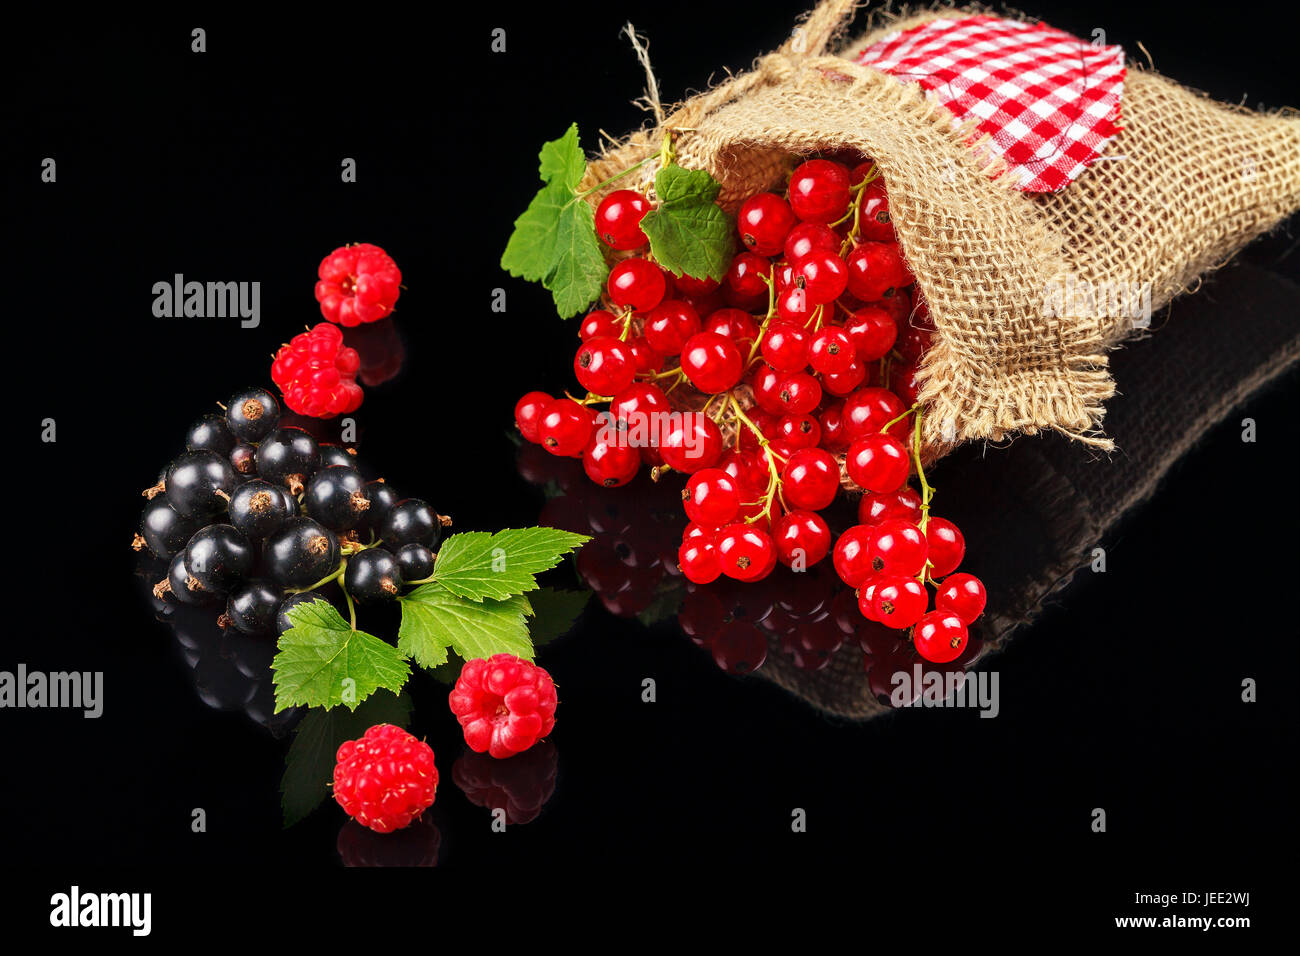 Fruits of raspberry, black currant and red currant on a dark background. Close-up Stock Photo